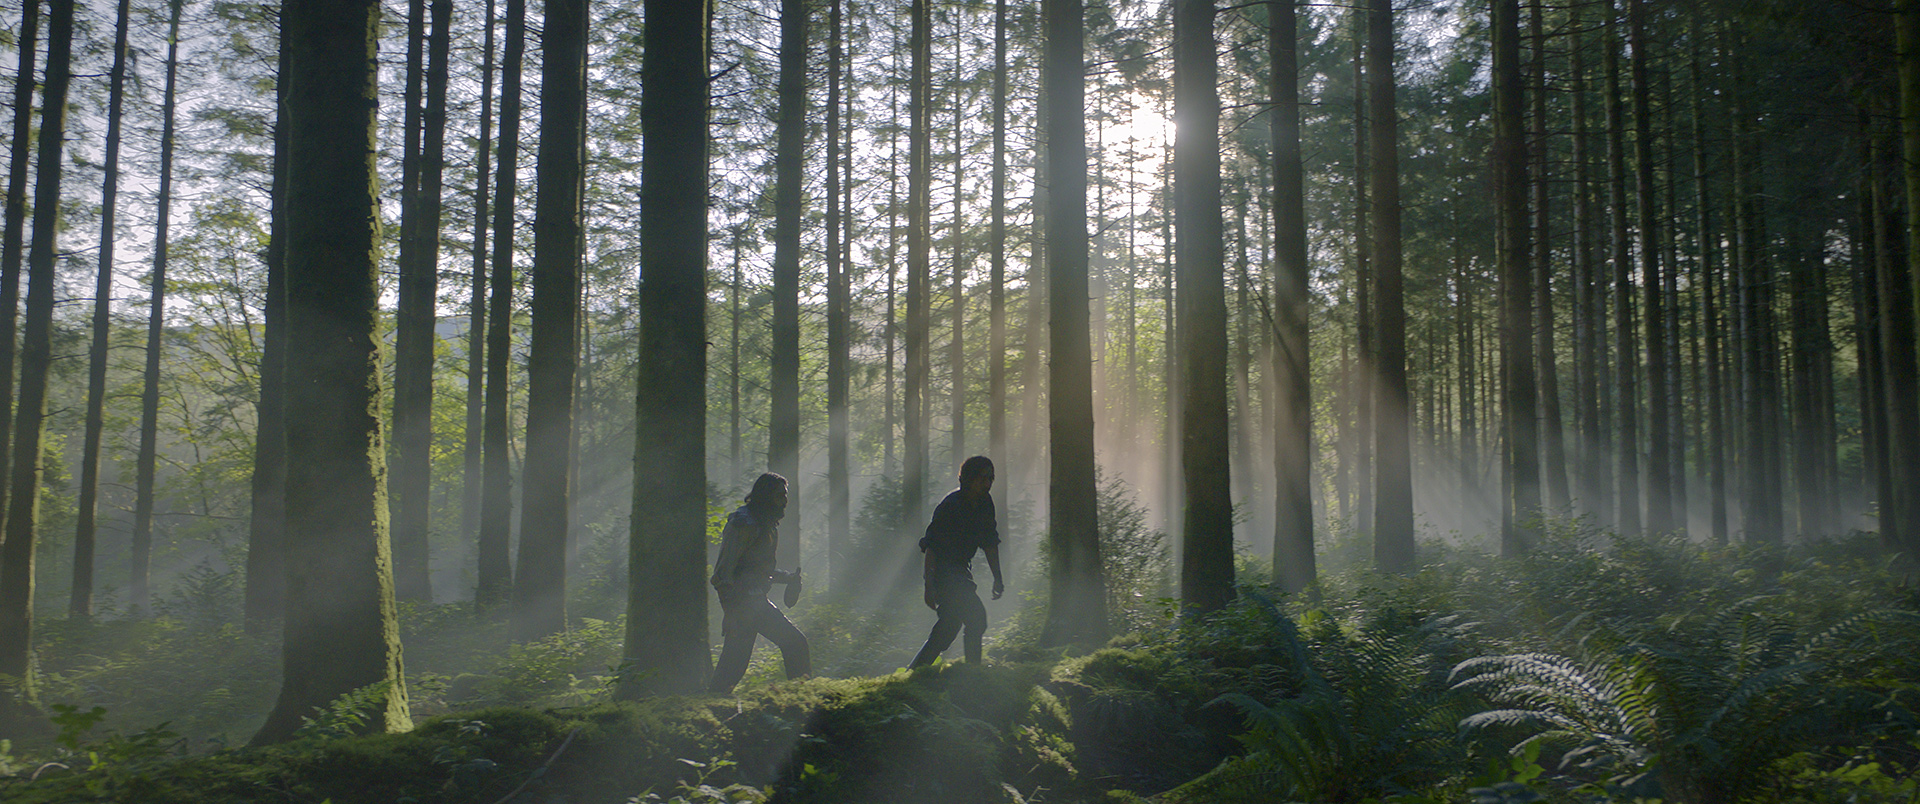 Graydon and Boorman walking through the forest